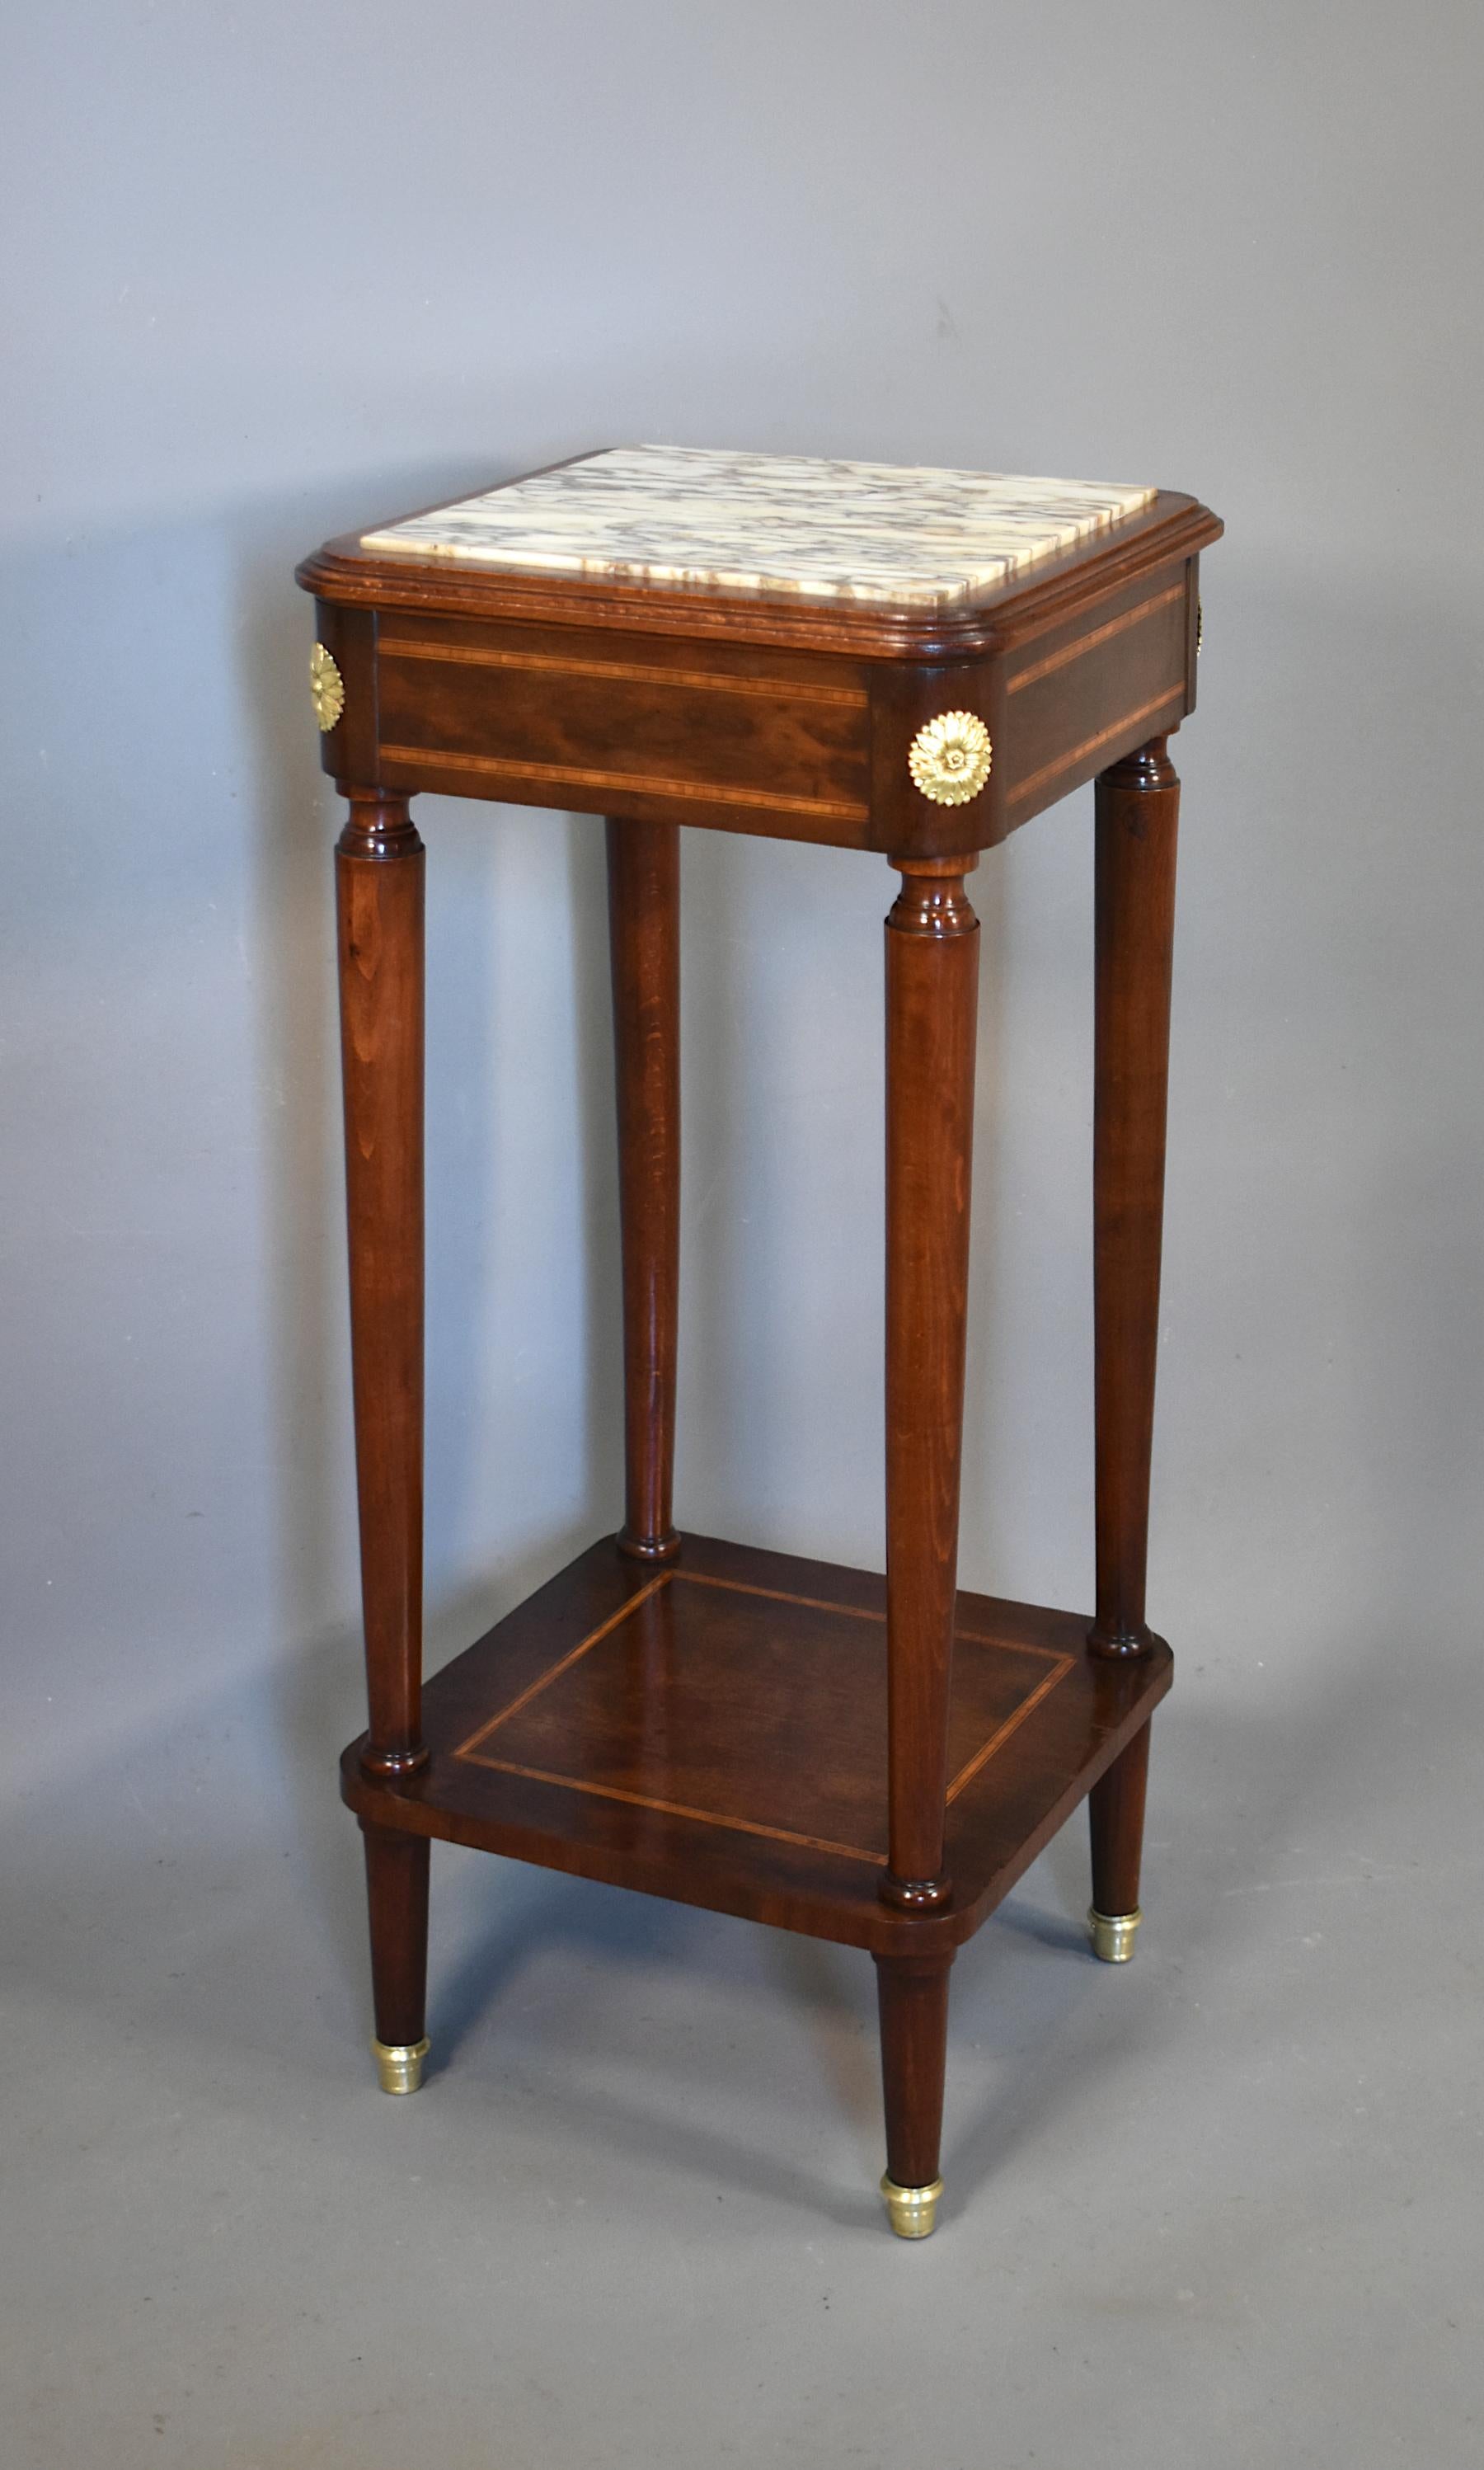 Antique French Gueridon side table sellette

This pretty mahogany gueridon side table features a stunning variegated marble top set into a moulded outer edging. 

The frieze is decorated all around with boxwood, ebony and satinwood banding and